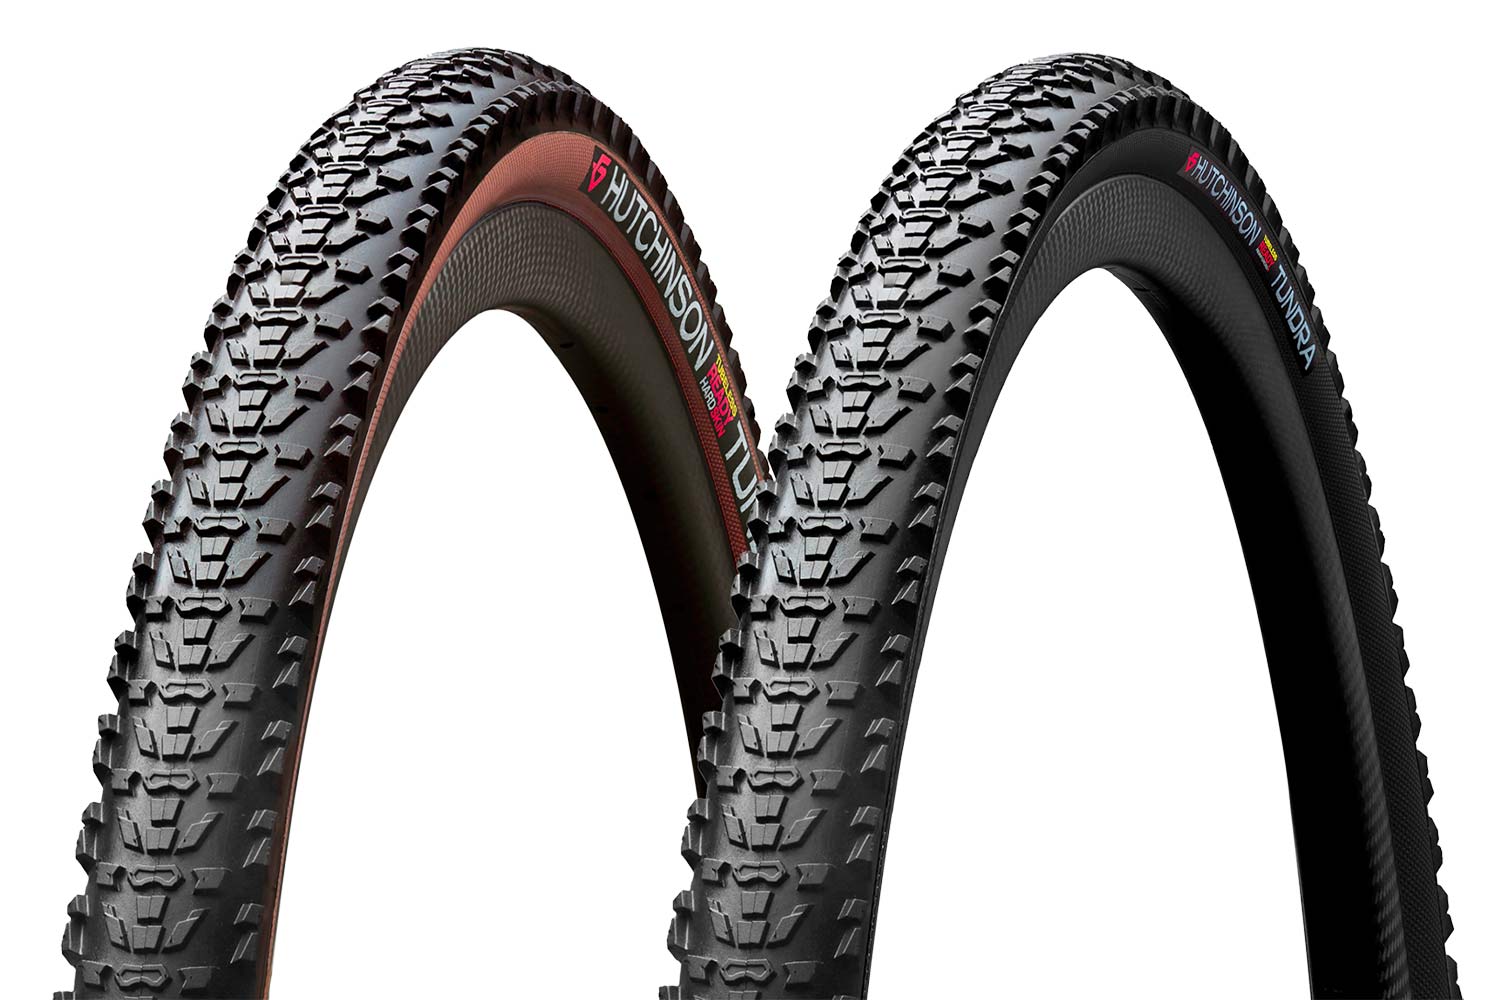 Hutchinson Tundra knobby adventure gravel tire review, color options